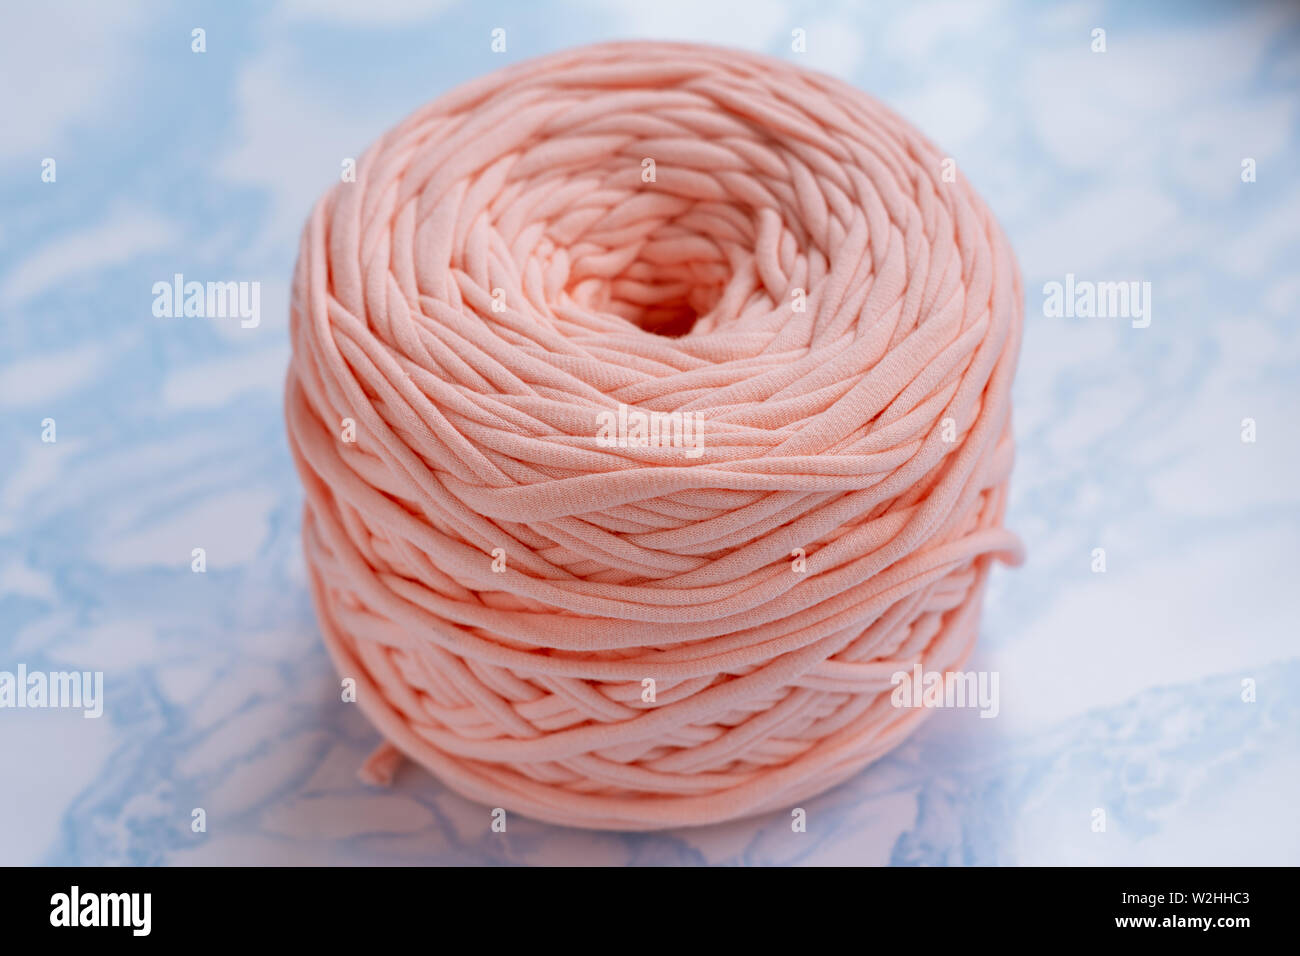 2,040 Large Knitting Needles Images, Stock Photos, 3D objects, & Vectors